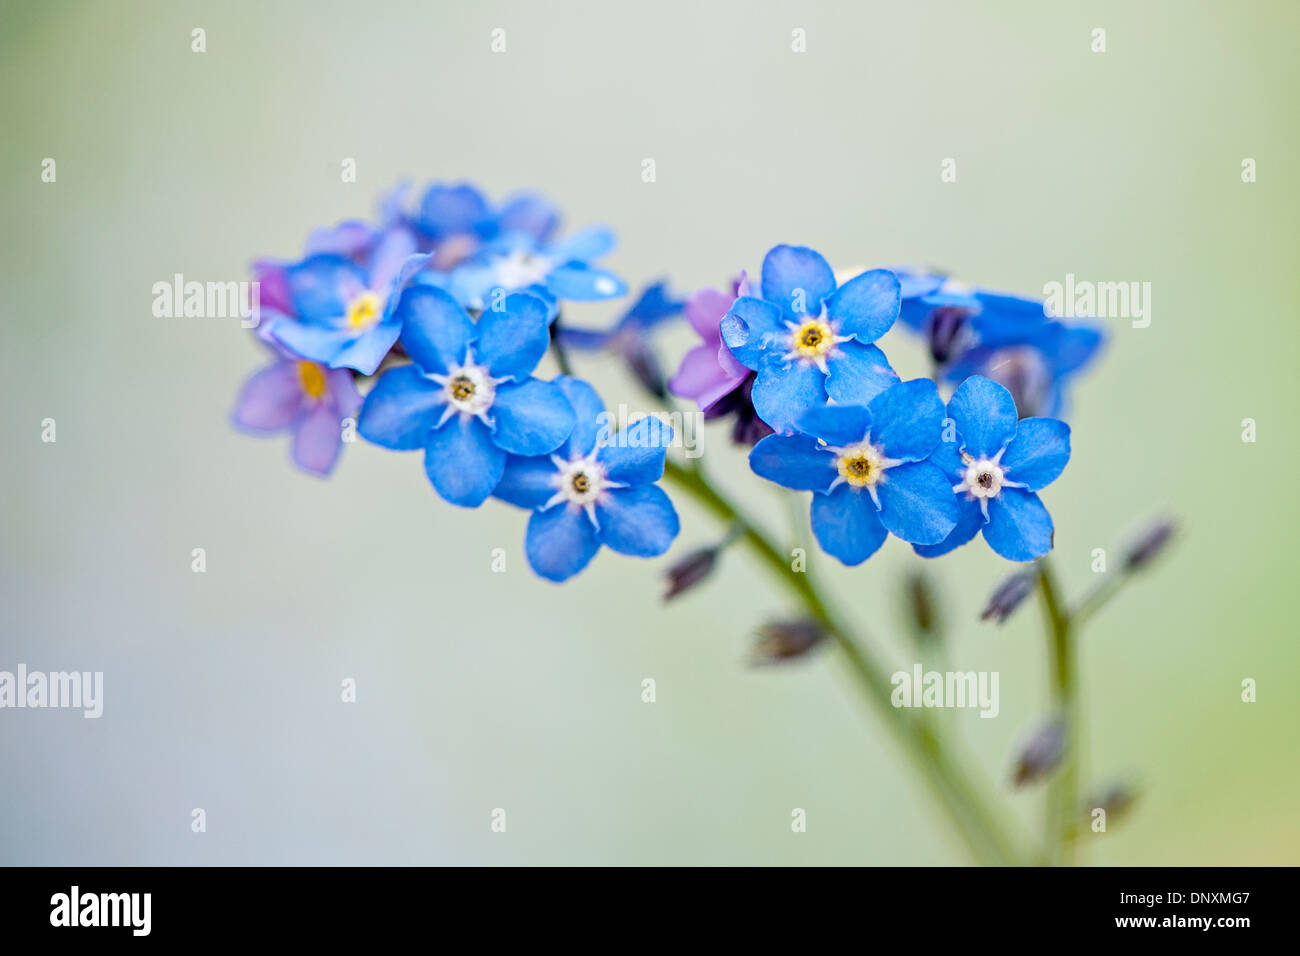 Close-up image of the delicate blue Forget me not flowers - Myosotis. Stock Photo